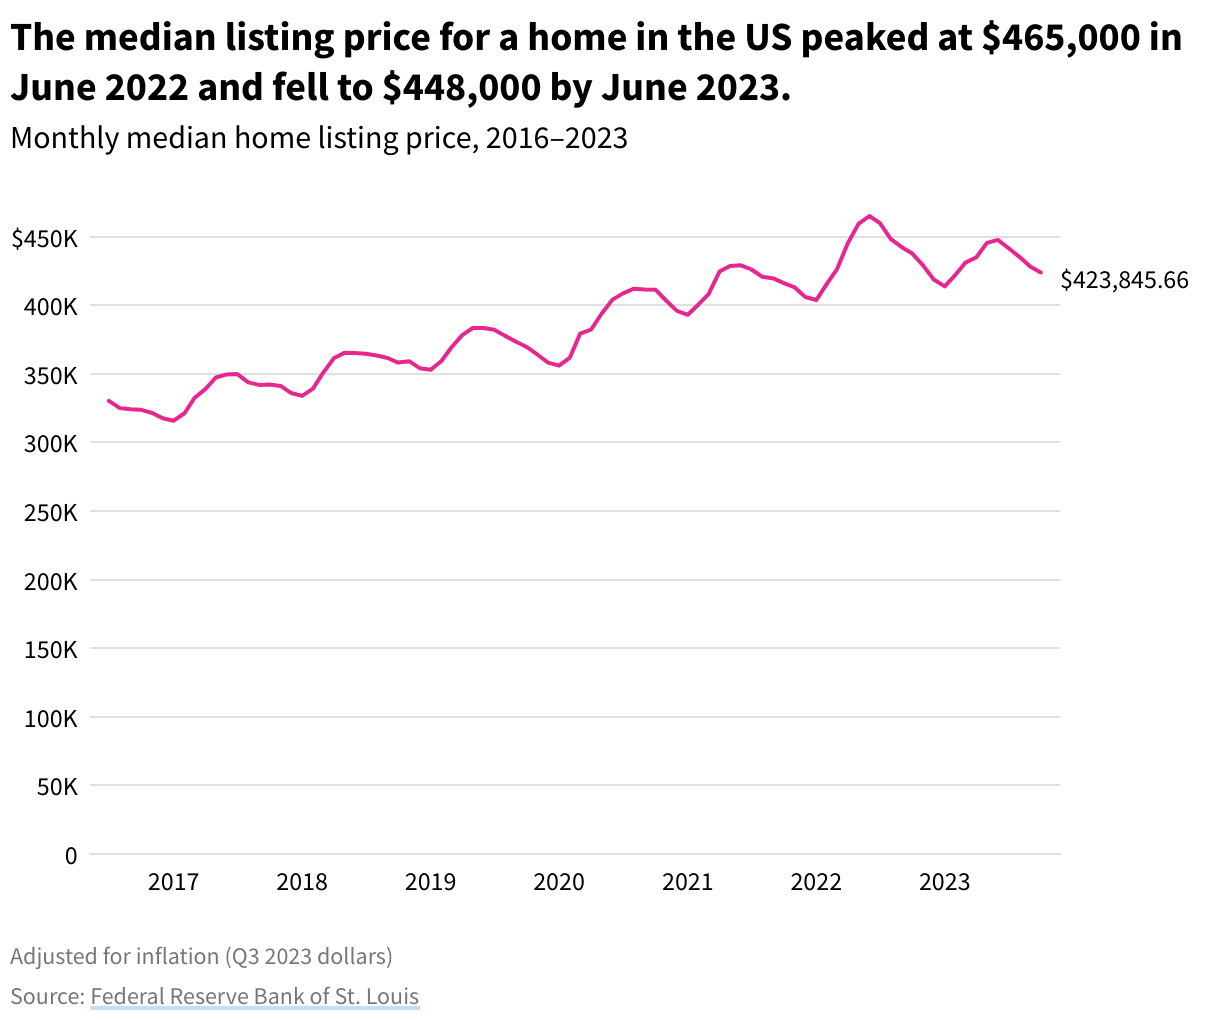 A line chart showing that the seasonal peaks in the median listing price increased from 2017 to 2022, then fell in 2023.